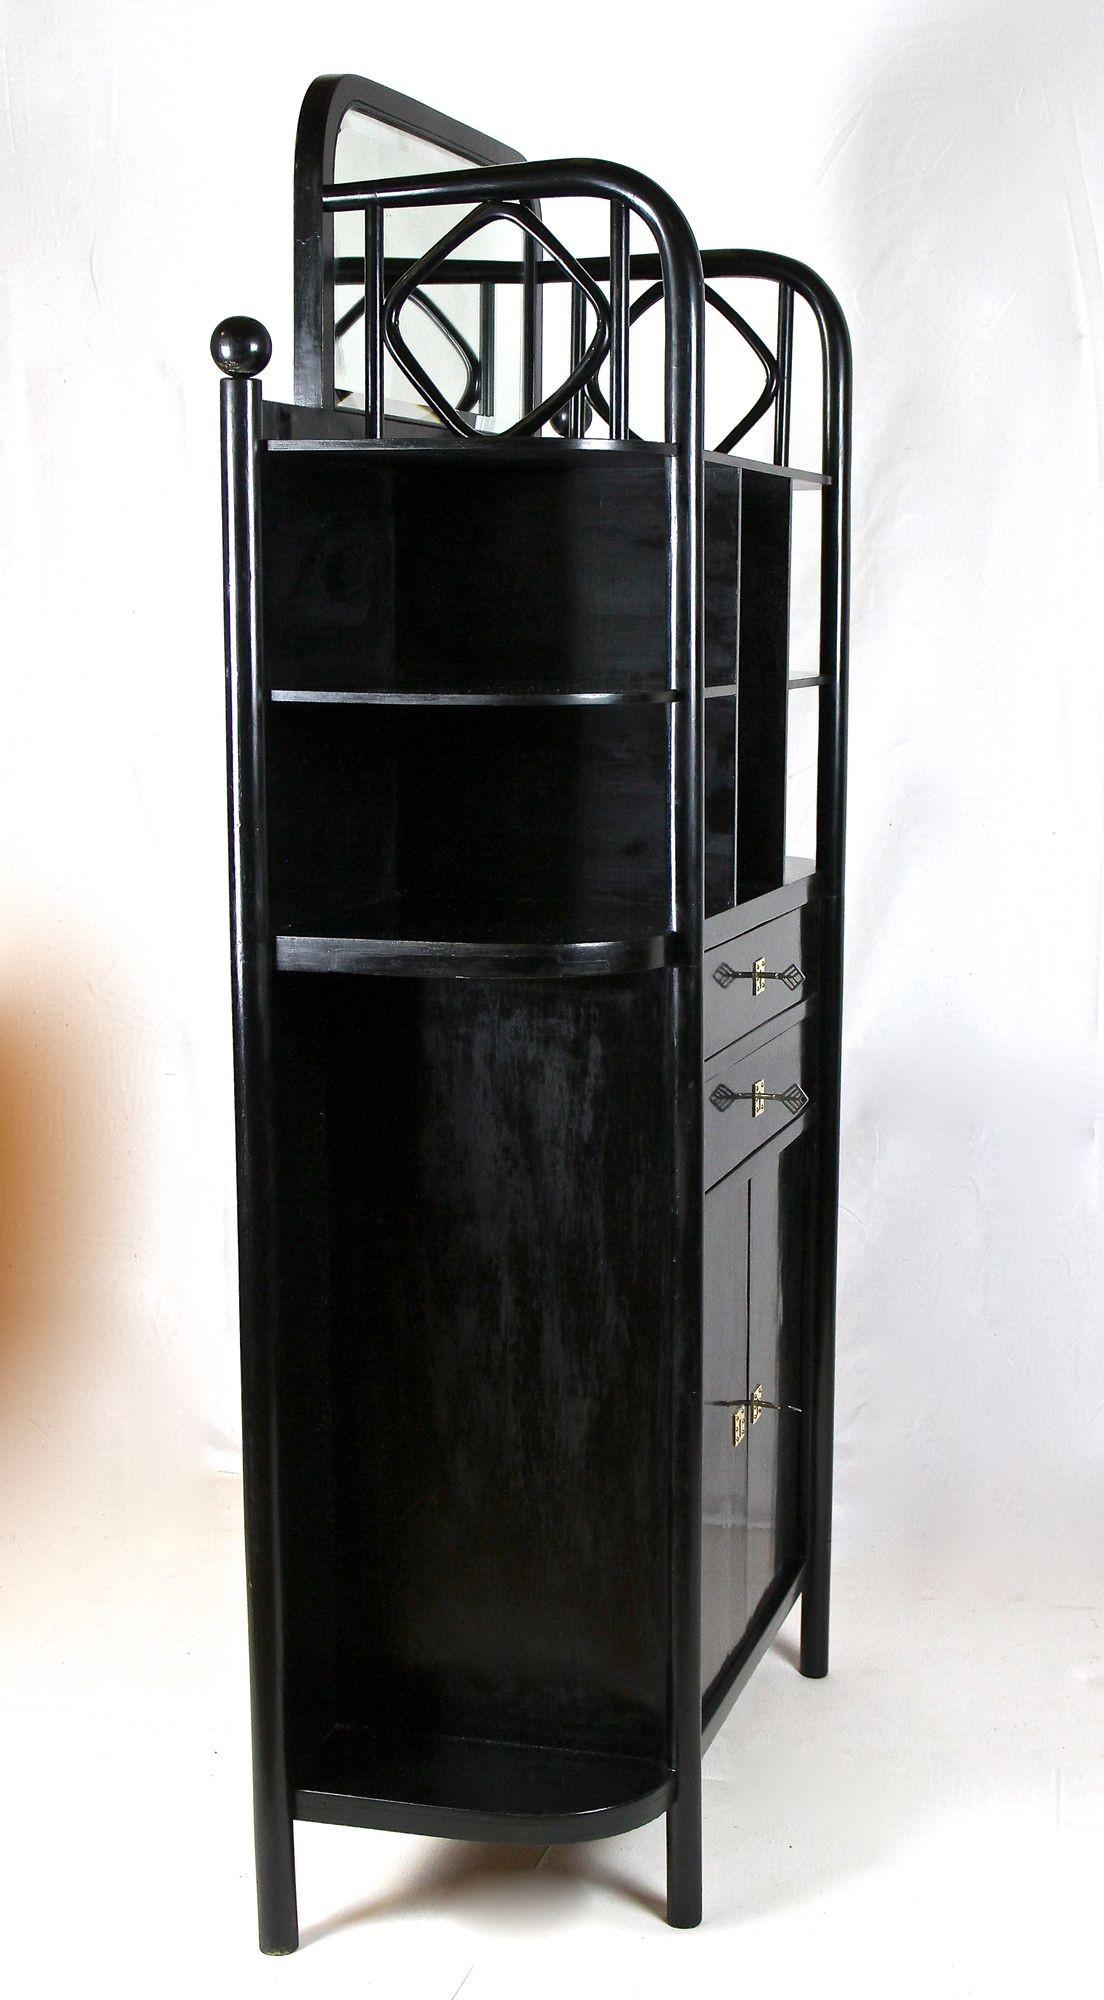 Black Art Nouveau Display Cabinet by Josef Hoffmann for Thonet, AT ca. 1905 For Sale 10